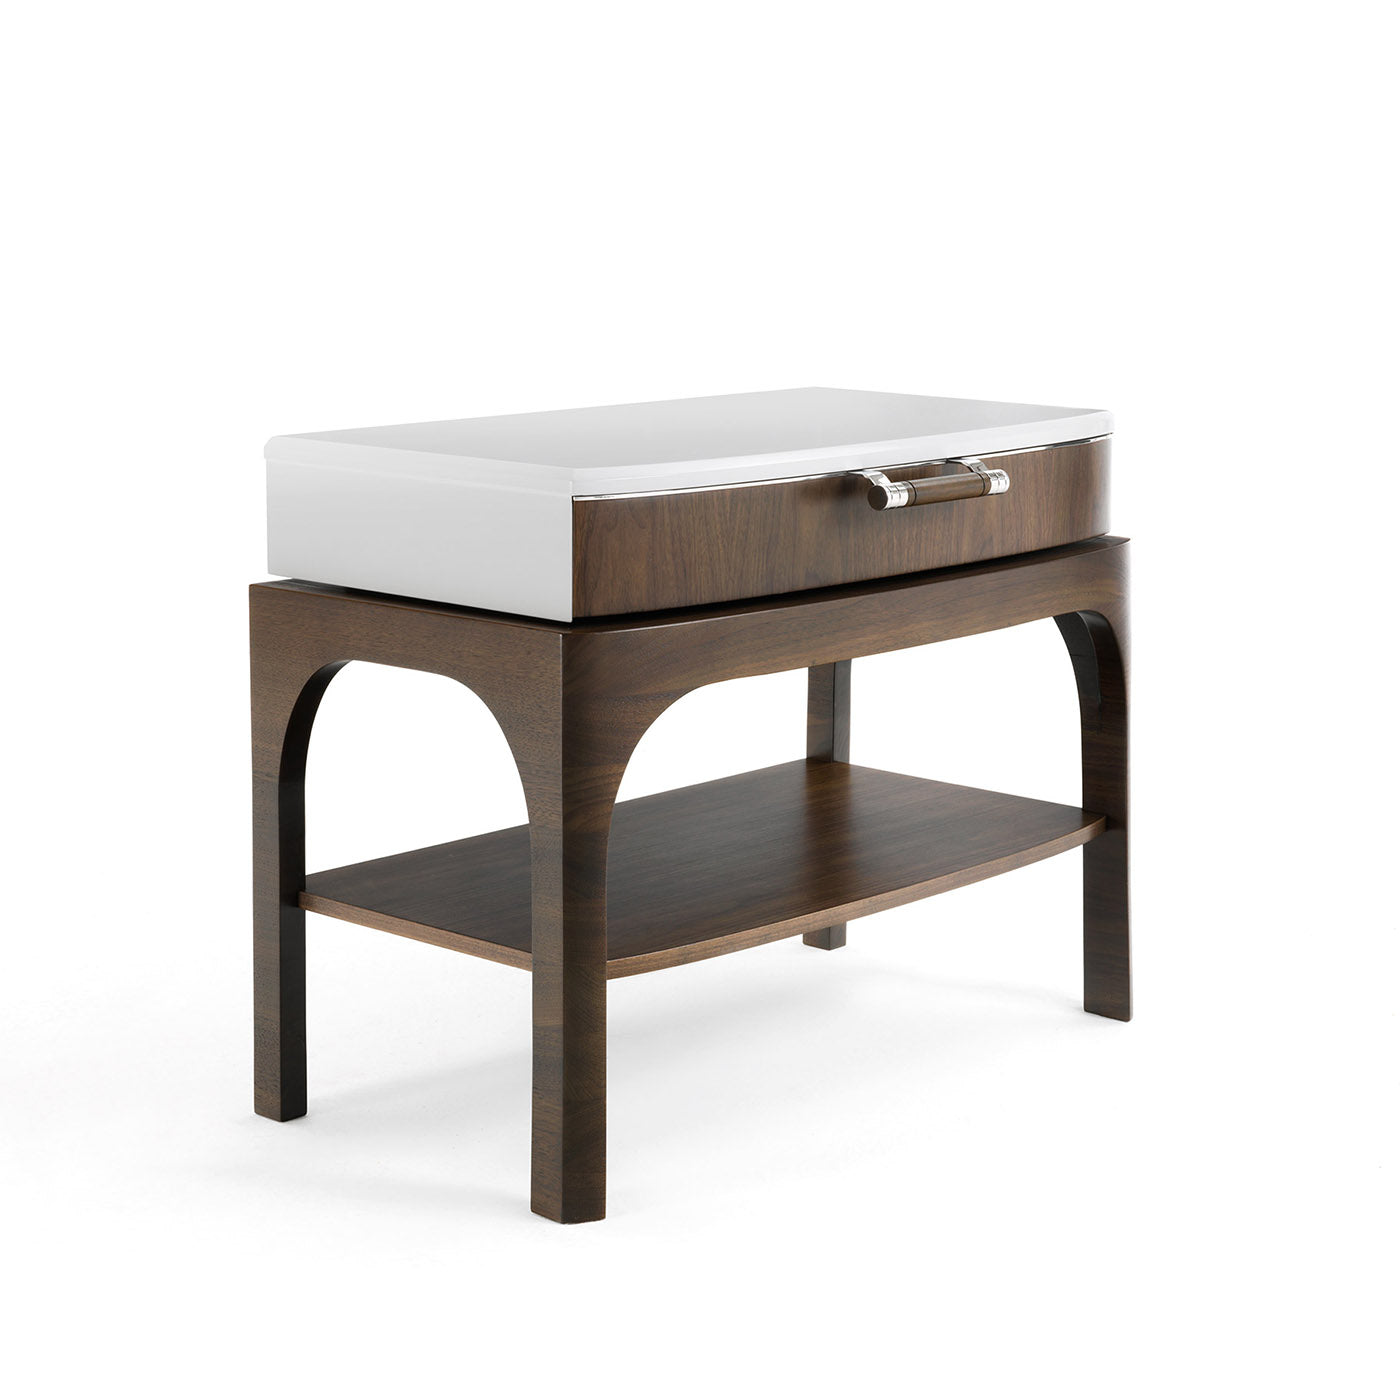 Canaletto Walnut Bedside Table - Alternative view 1